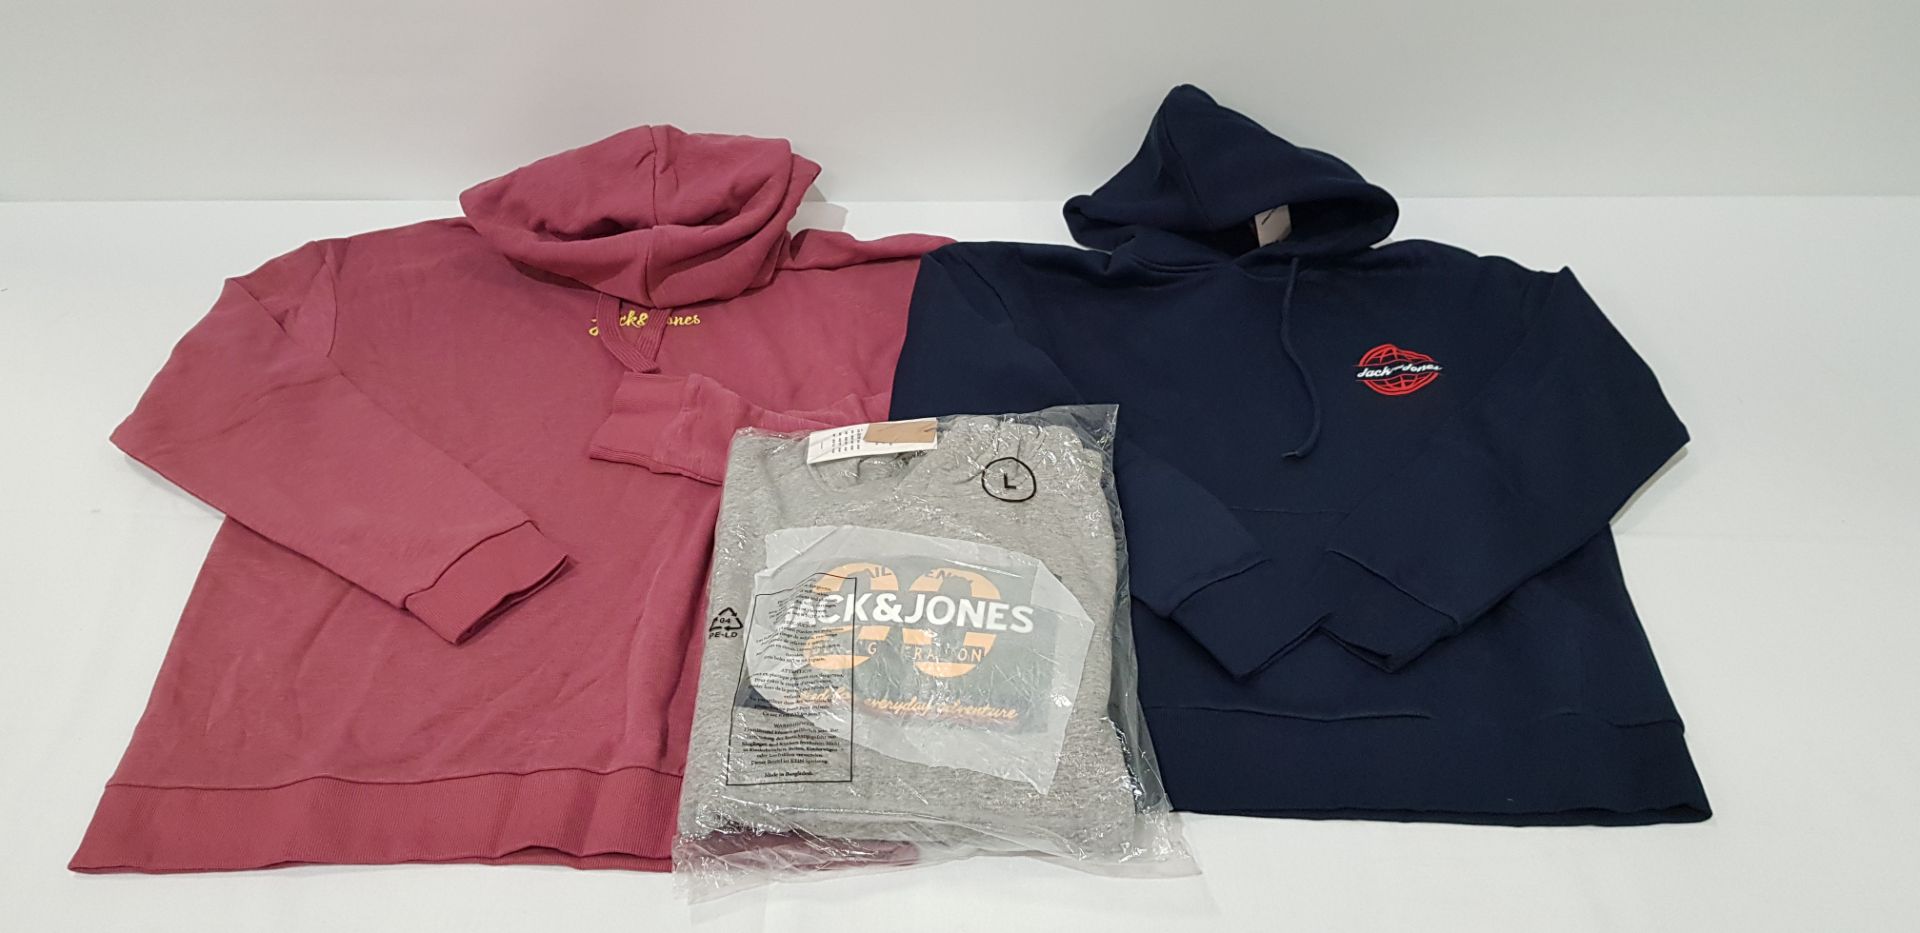 11 X BRAND NEW MIXED LOT CONTAINING 7 JACK AND JONES HOODIES IN GREY, NAVY AND ROSE RED IN MIXED